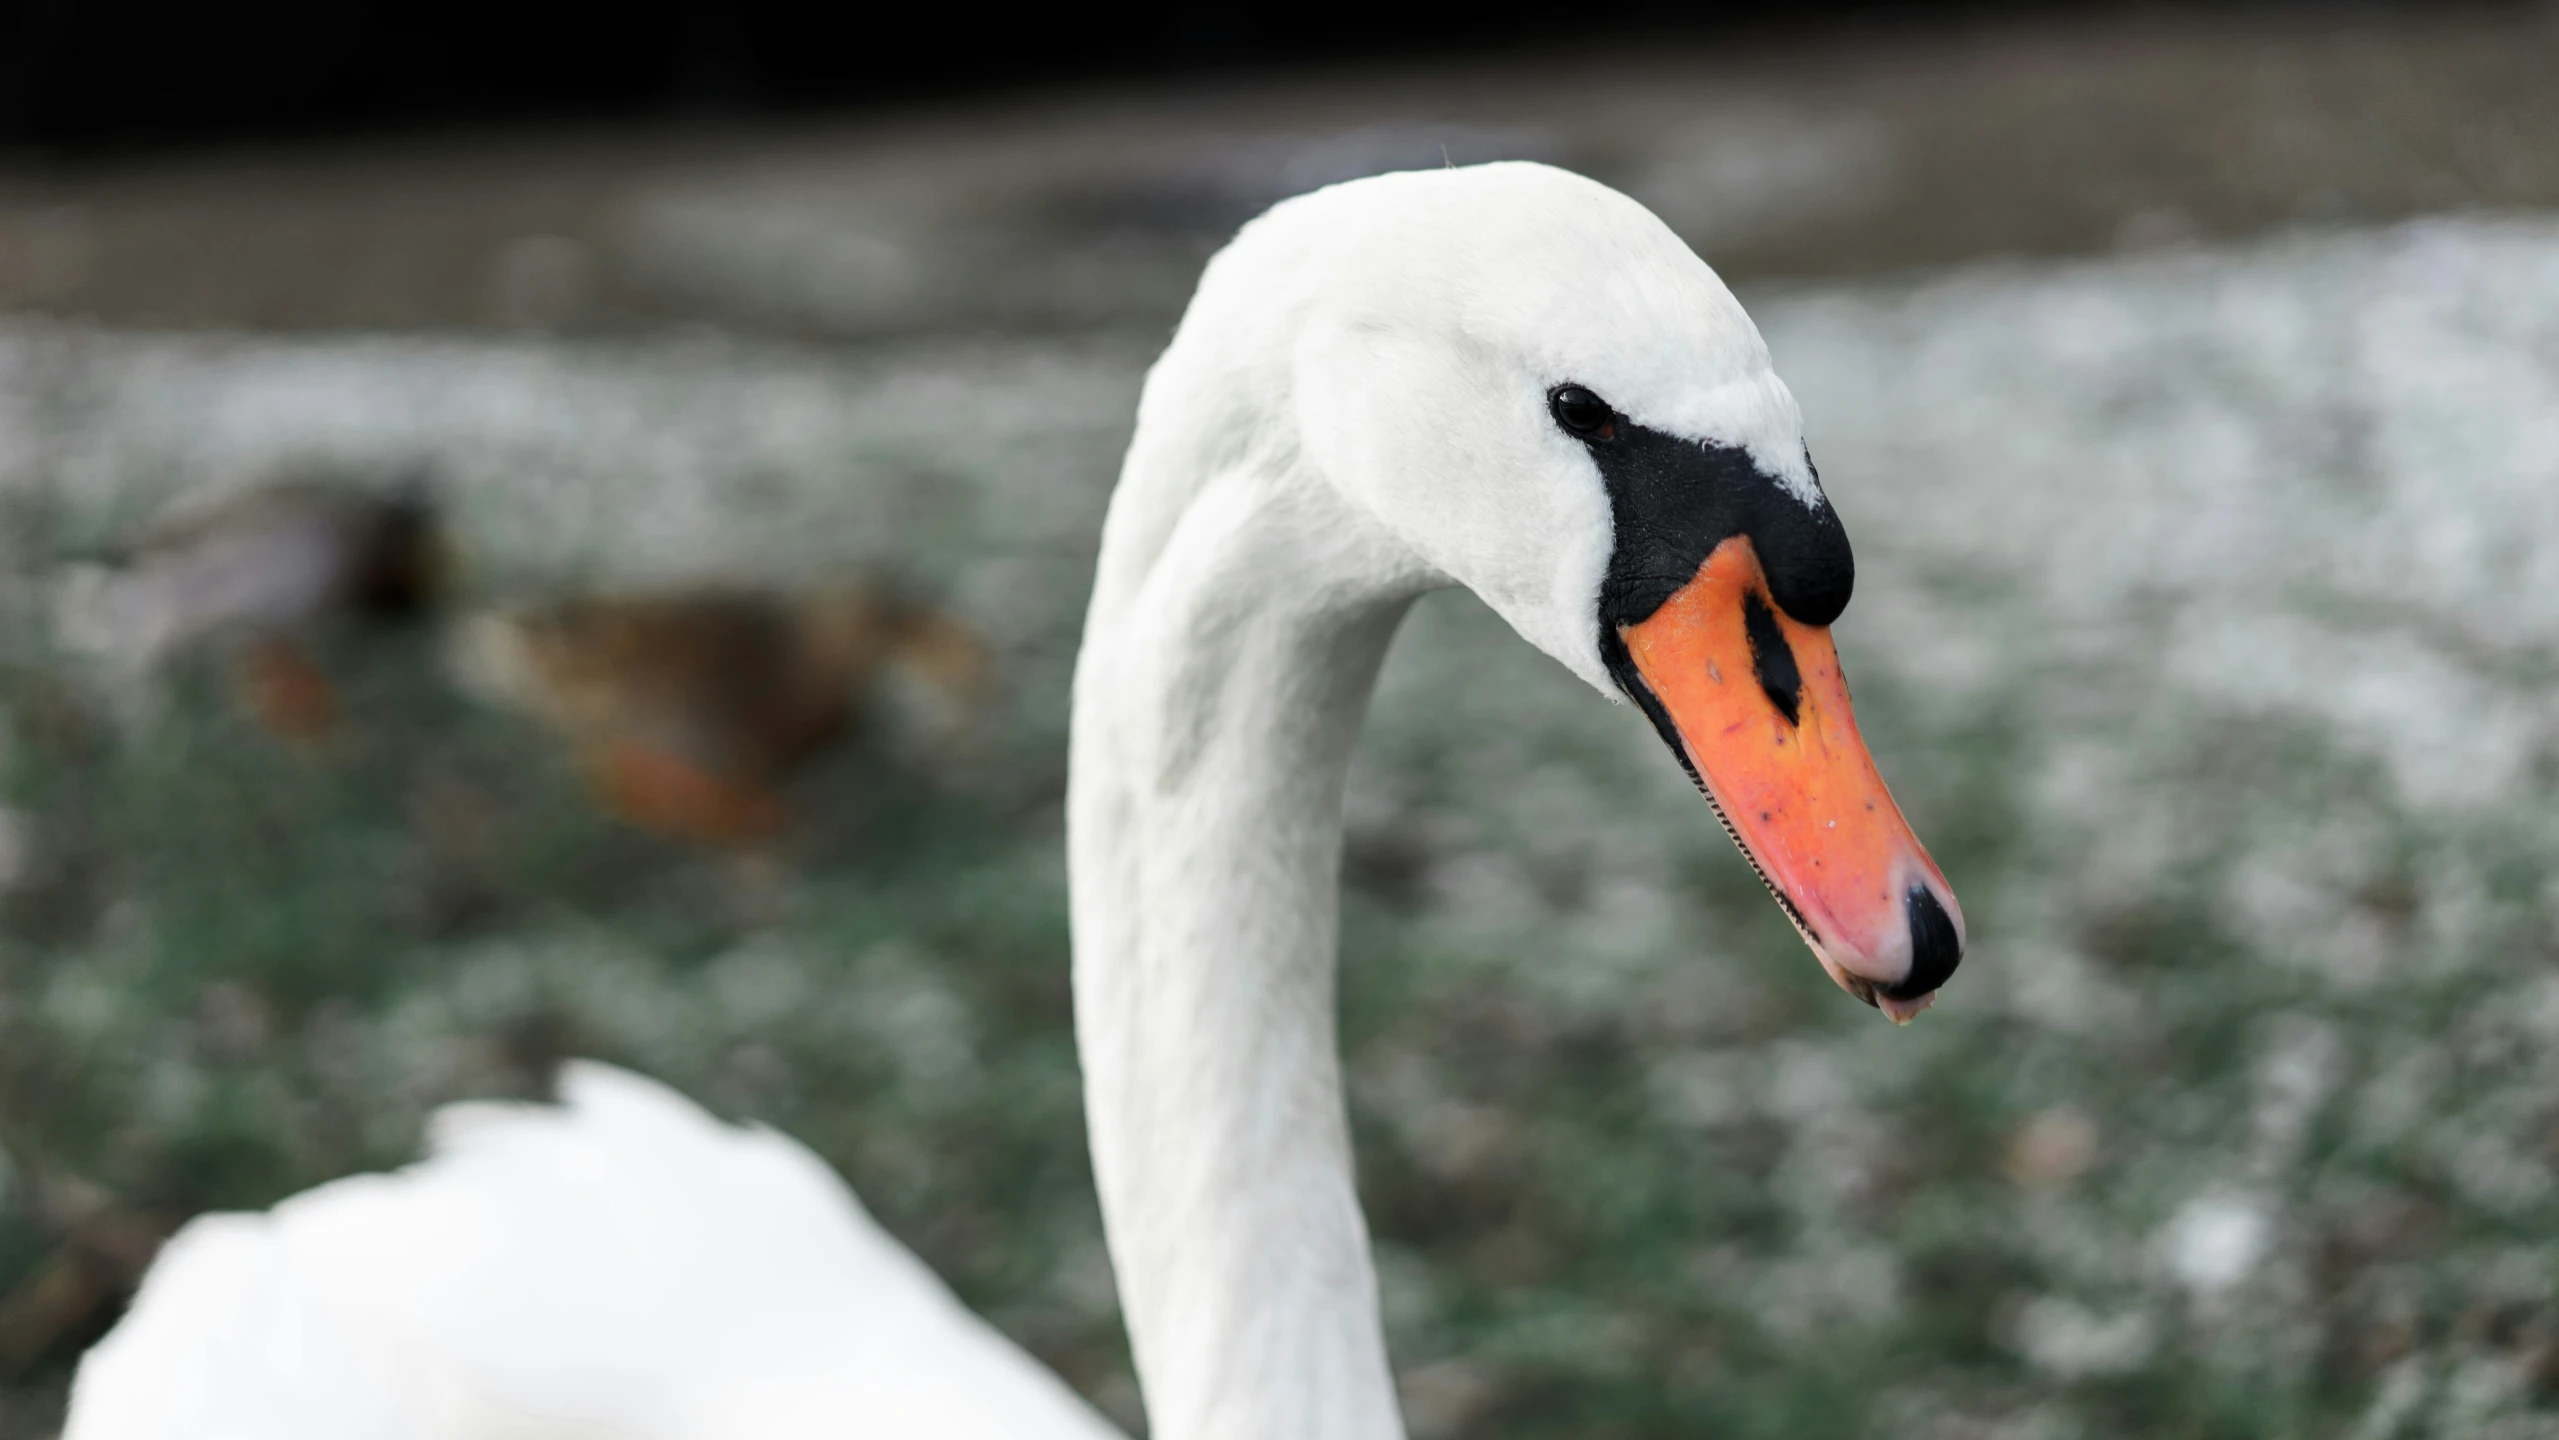 the close up of a swan's head and neck